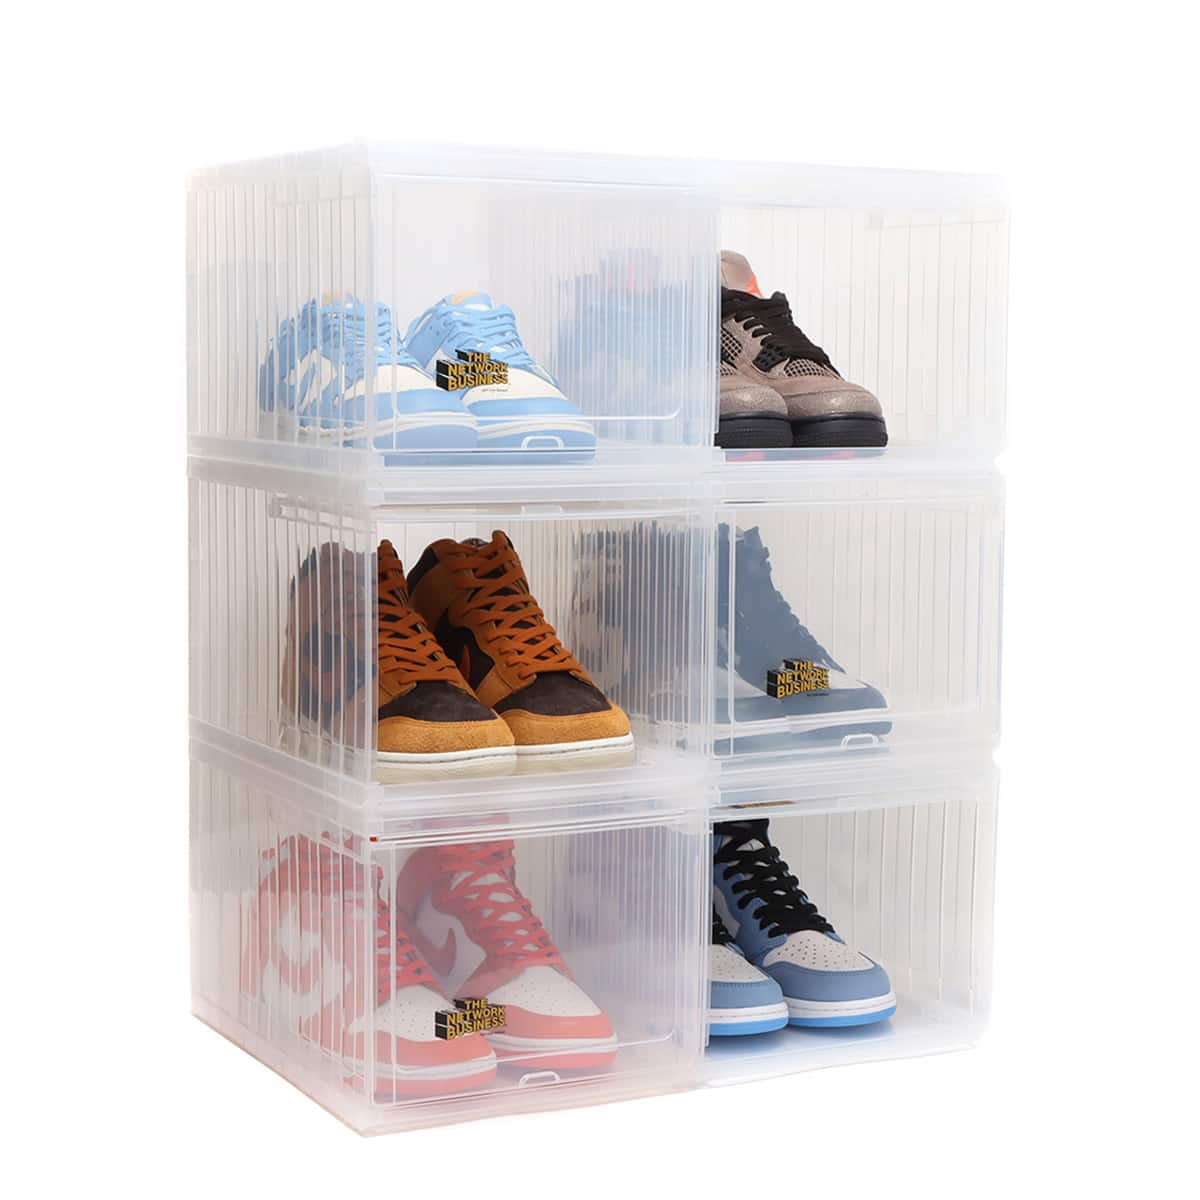 AVIC × THE NETWORK BUSINESS SNEAKERS BOX CLEAR 21SU-I_photo_large